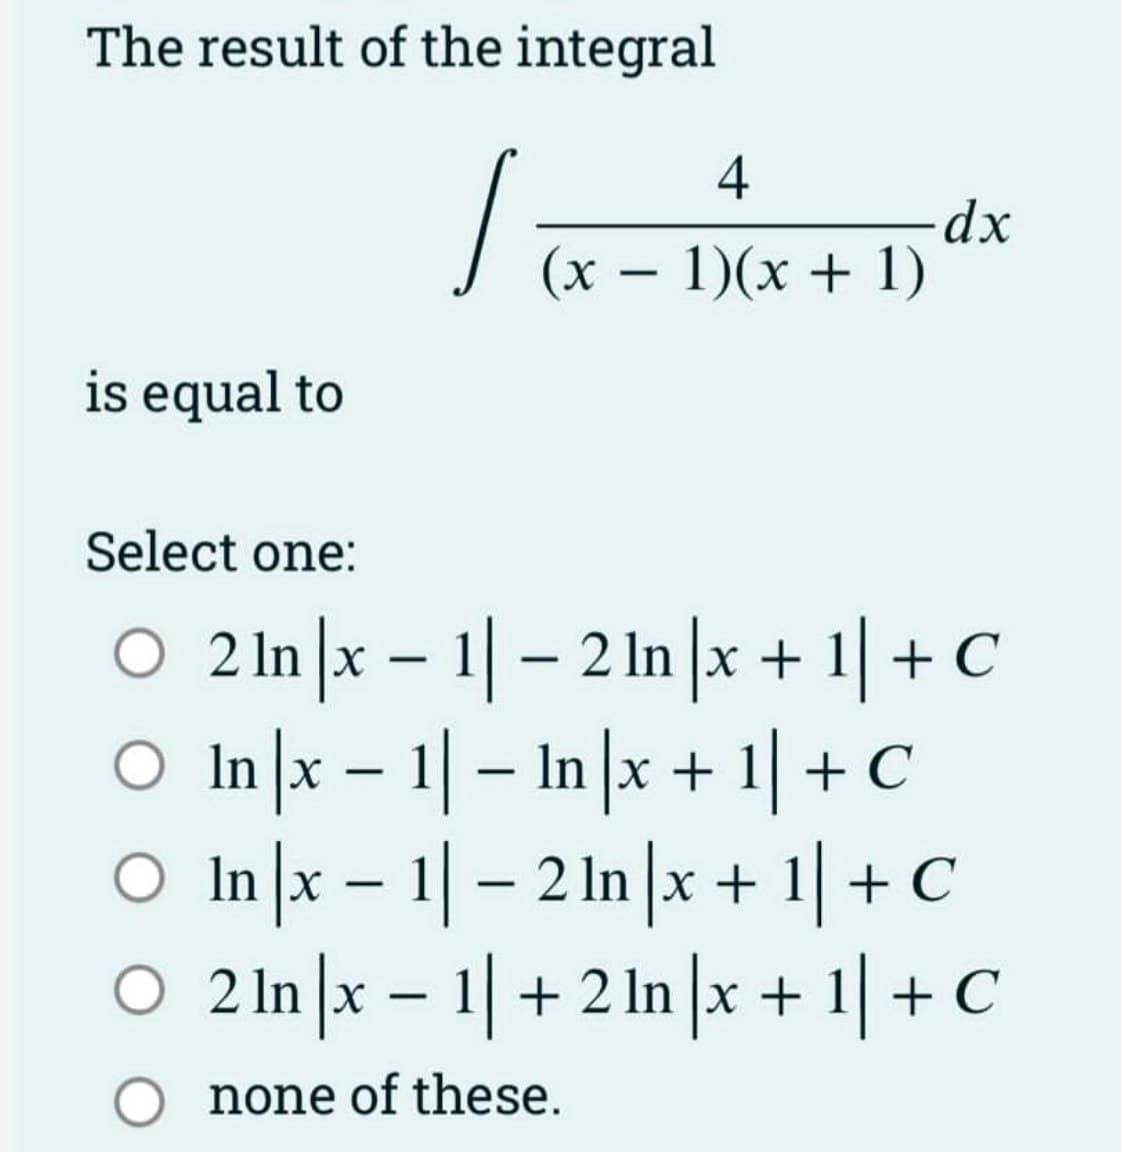 The result of the integral
/
is equal to
4
(x - 1)(x + 1)
-dx
Select one:
○ 2ln |x-1|-2 ln |x + 1| + C
○ In |x-1|- In x + 1] + C
○ In |x − 1| − 2 ln |x + 1| + C
O 2 In |x-1| + 2 In|x + 1| + C
O none of these.